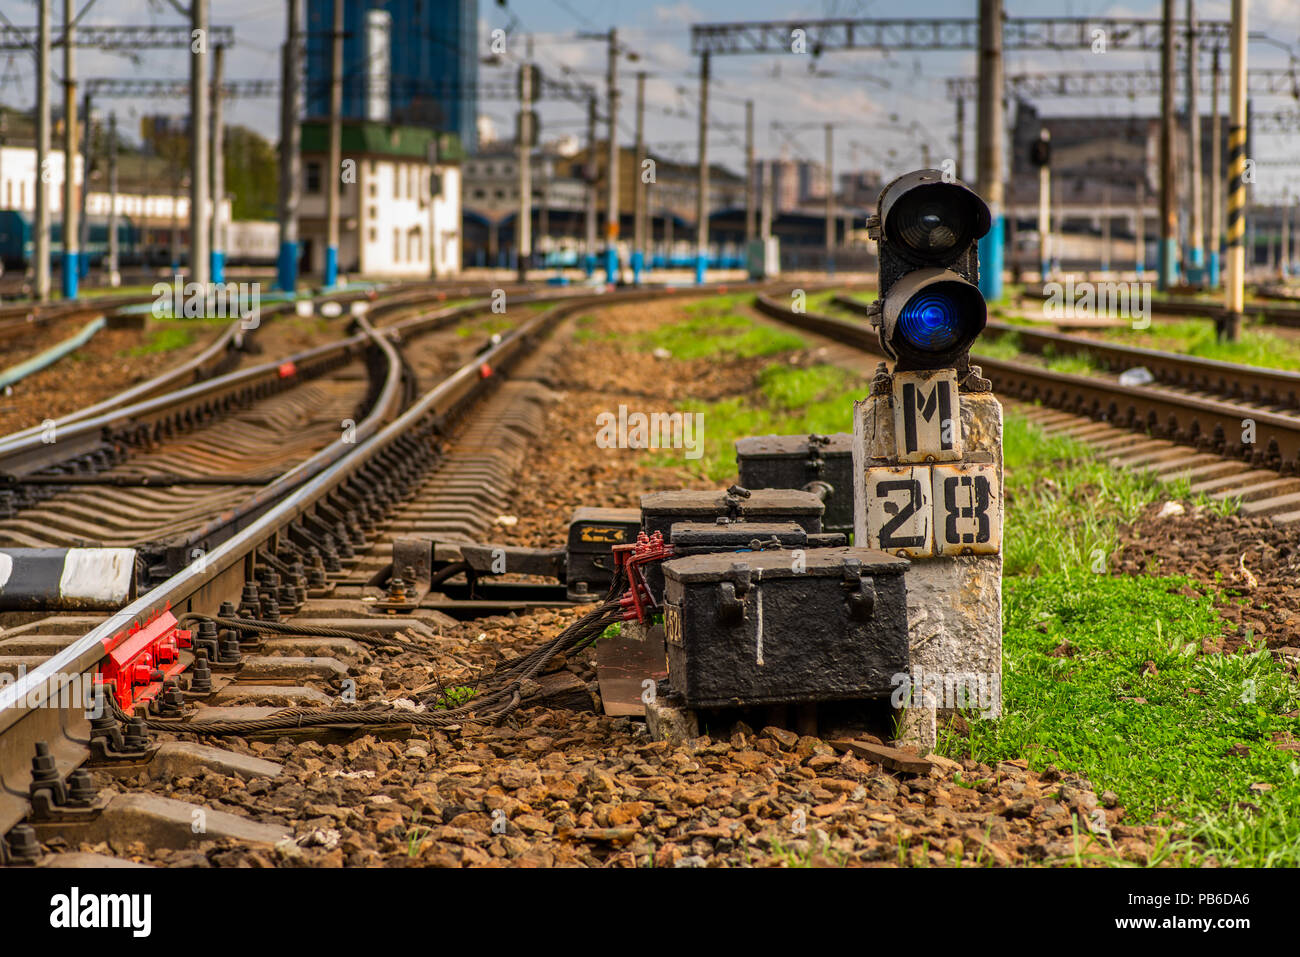 blue signal of the semaphore of the railway track Stock Photo